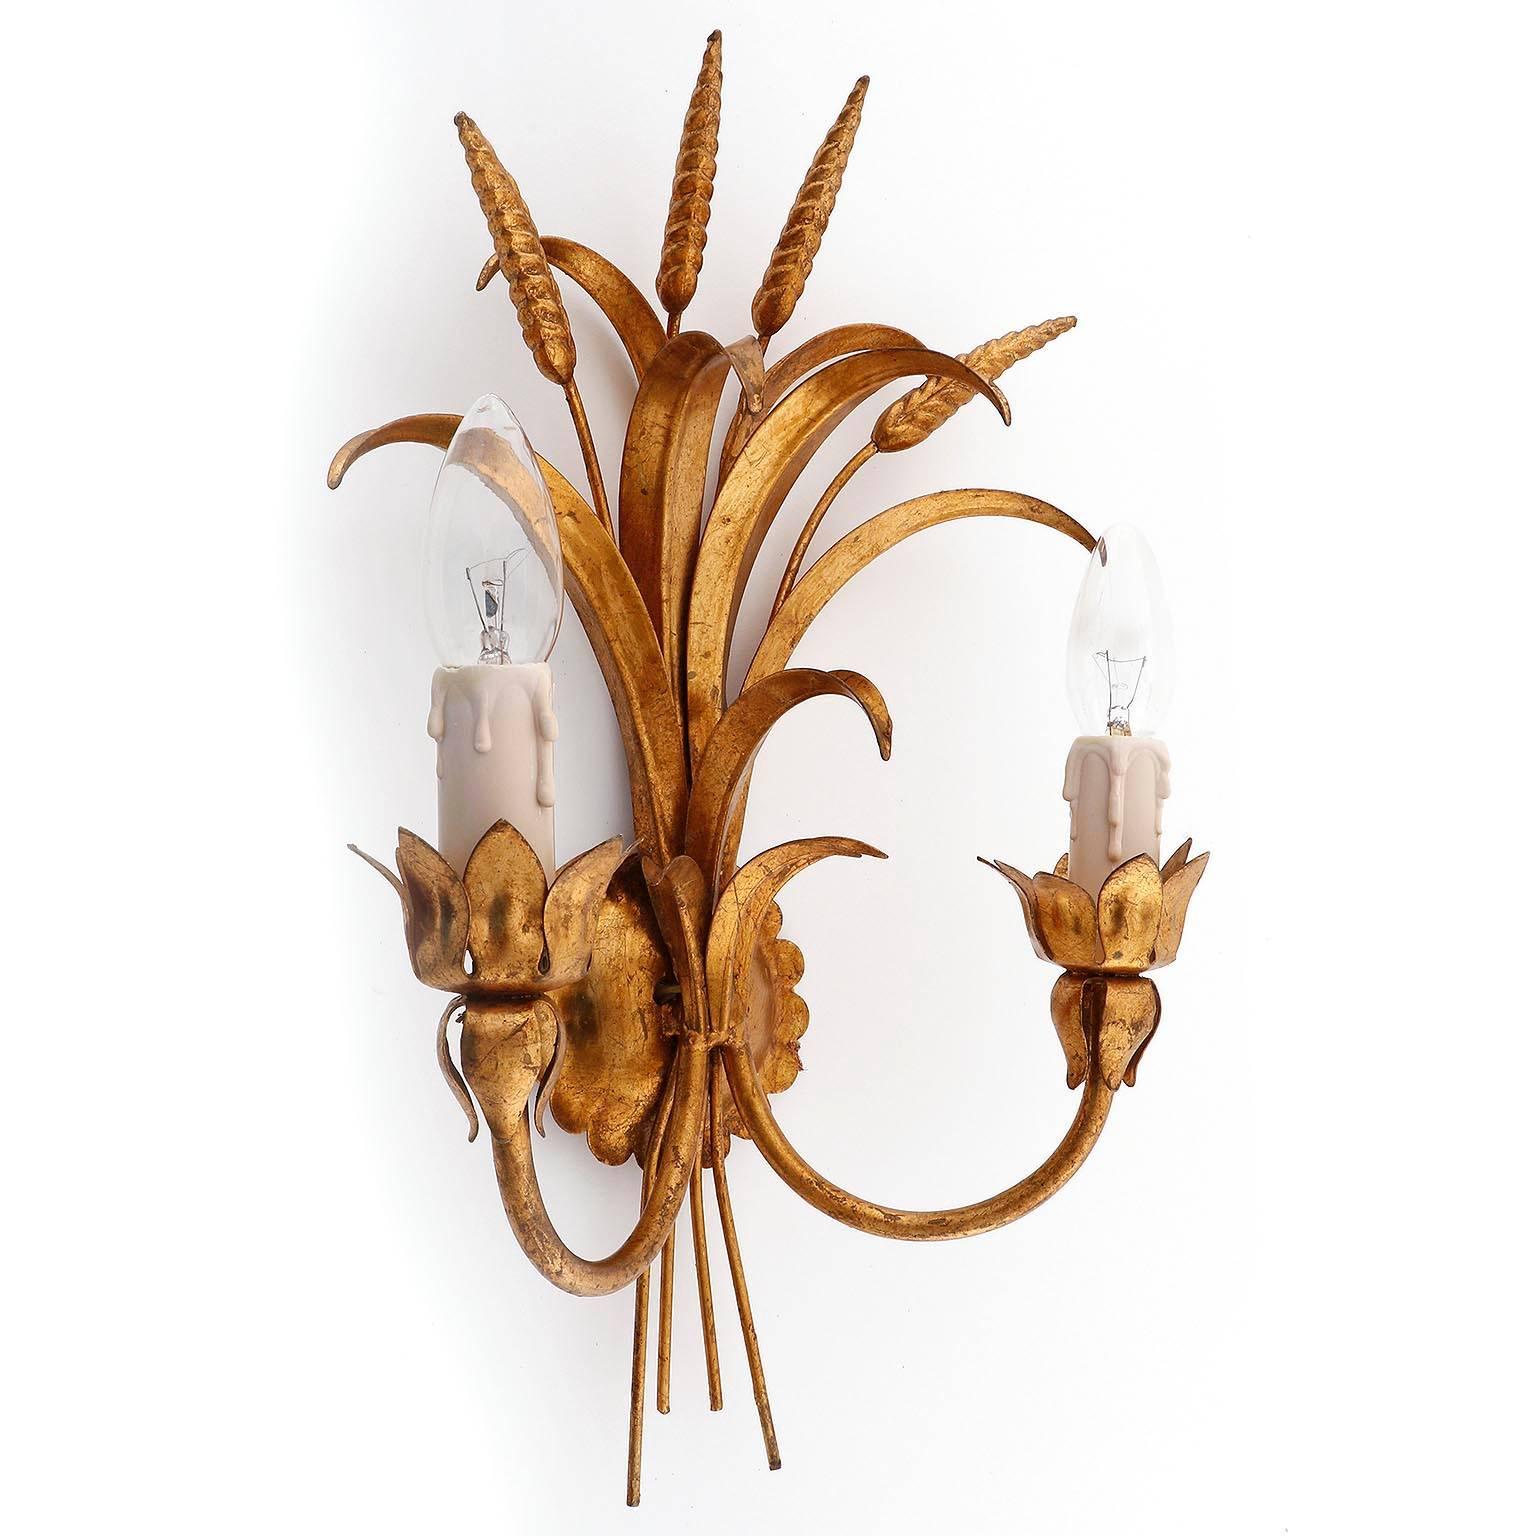 A single and large wall light fixture from Italy manufactured in Mid-Century (1960s-1970s). It is in the form of a wheat sheaf and made of antique gilt or bronzed metal. The lamp has two sockets for small base bulbs or LEDs.

Cleaned, rewired, ready